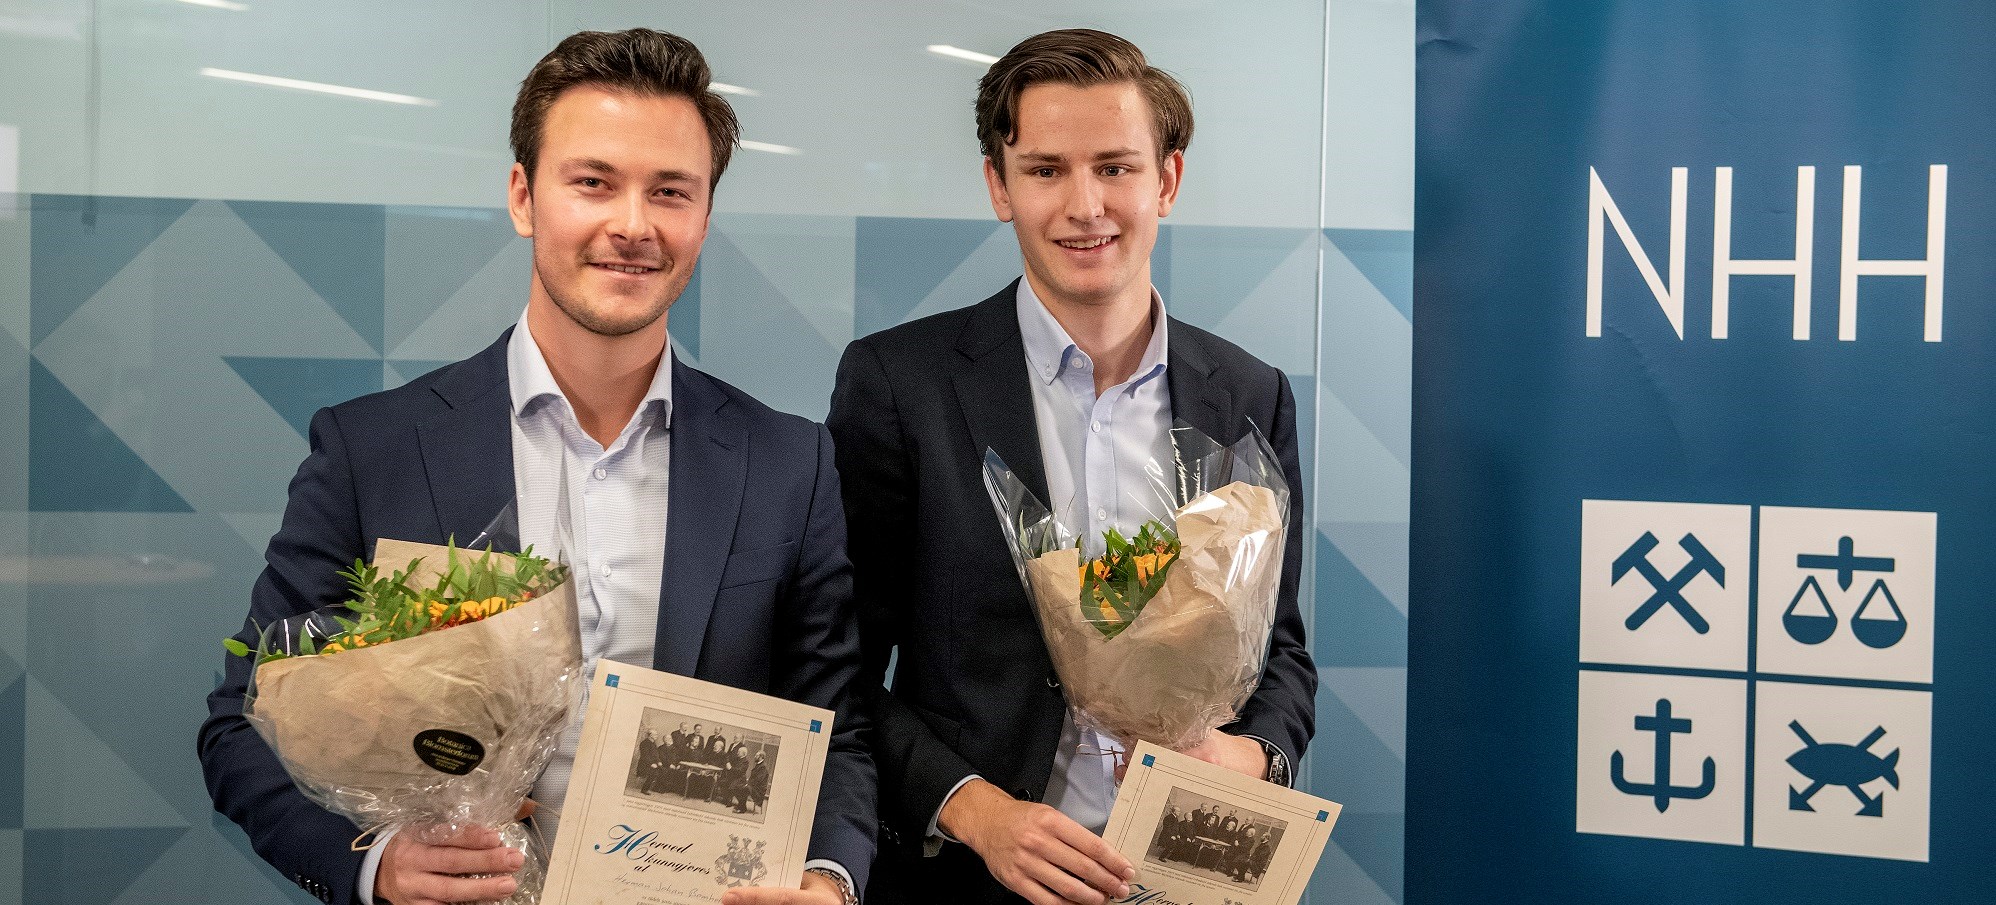 In connection with the Lehmkuhl lecture in October, Herman Johan Bomholt and Torsten Stangeland Thune were awarded a grant of NOK 25,000 for their master’s thesis. Photo: Helge Skodvin 